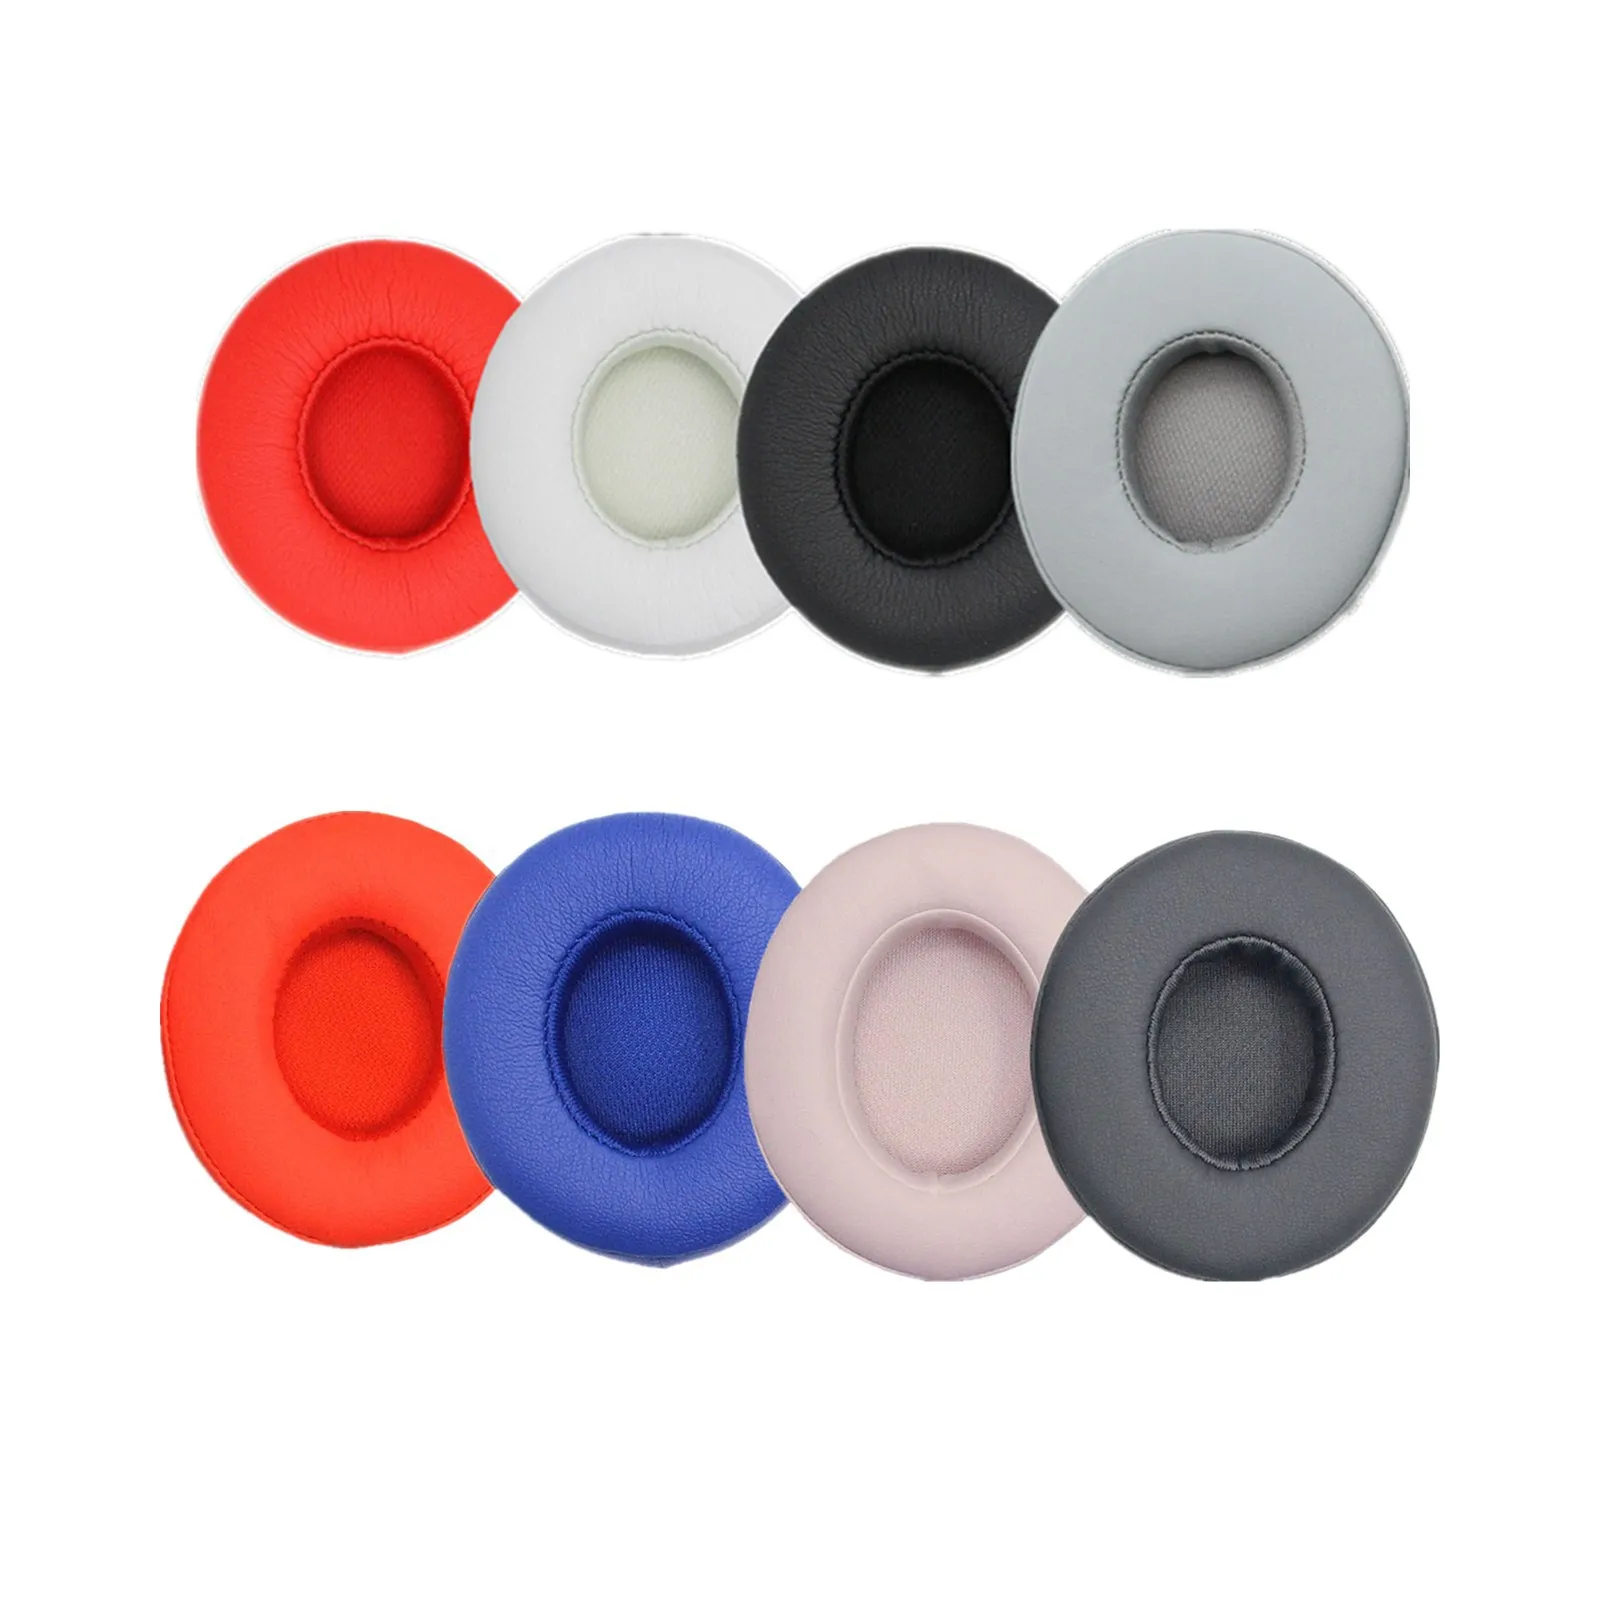 

1 pair Replacement Ear Ppads Cushion For Solo 2 Wireless Earpads Earbuds For Beats Solo 3 Headset Case Ultra-soft Protein Skin